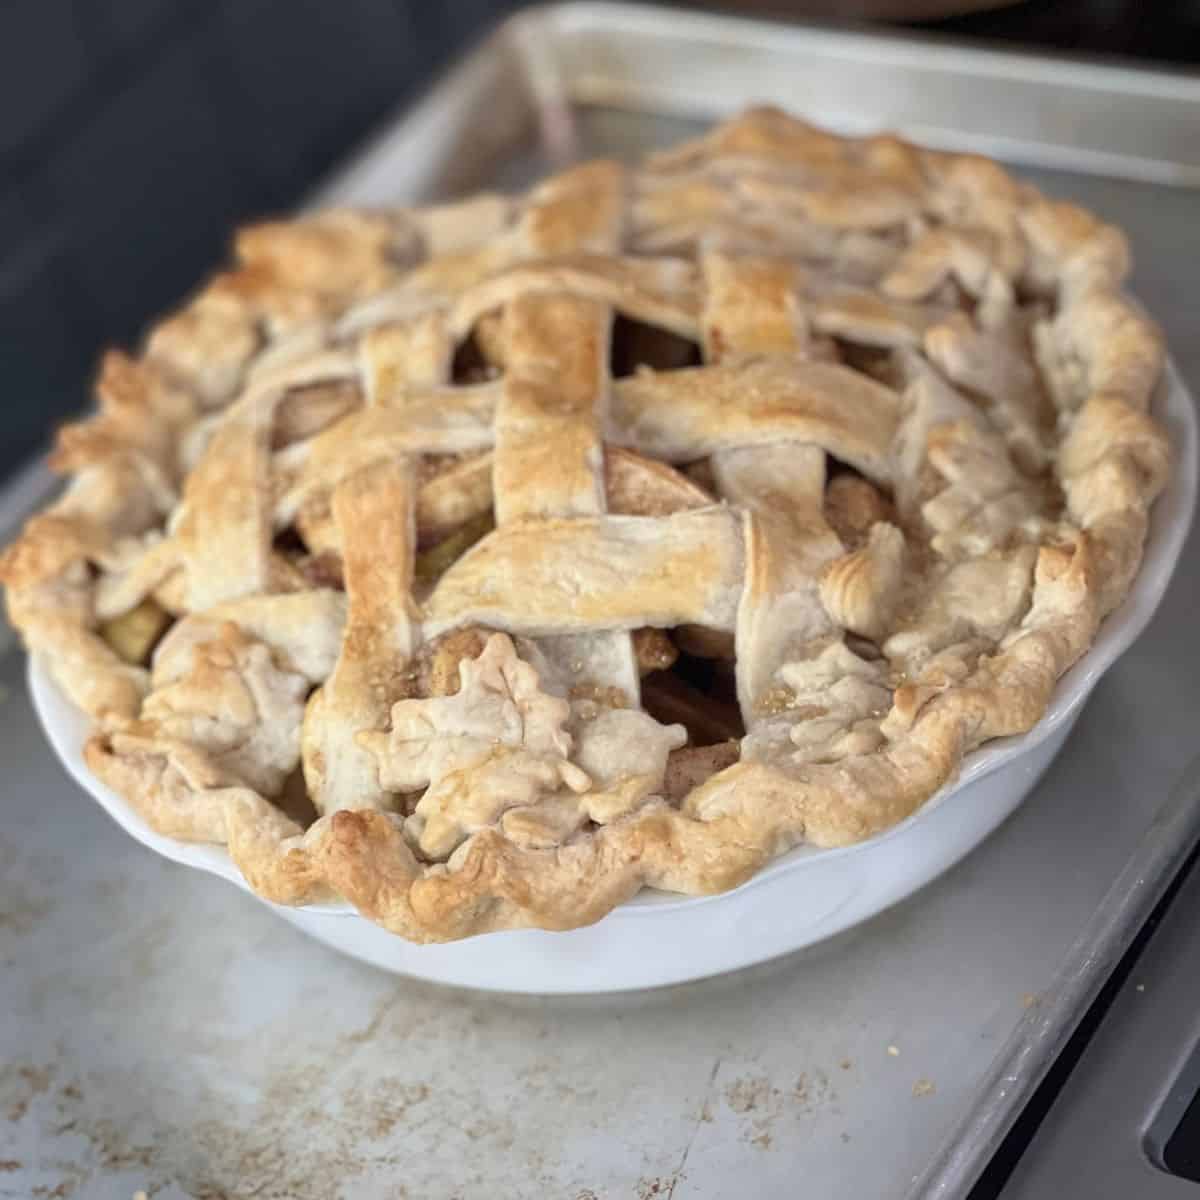 Apple pie ready to go into the oven